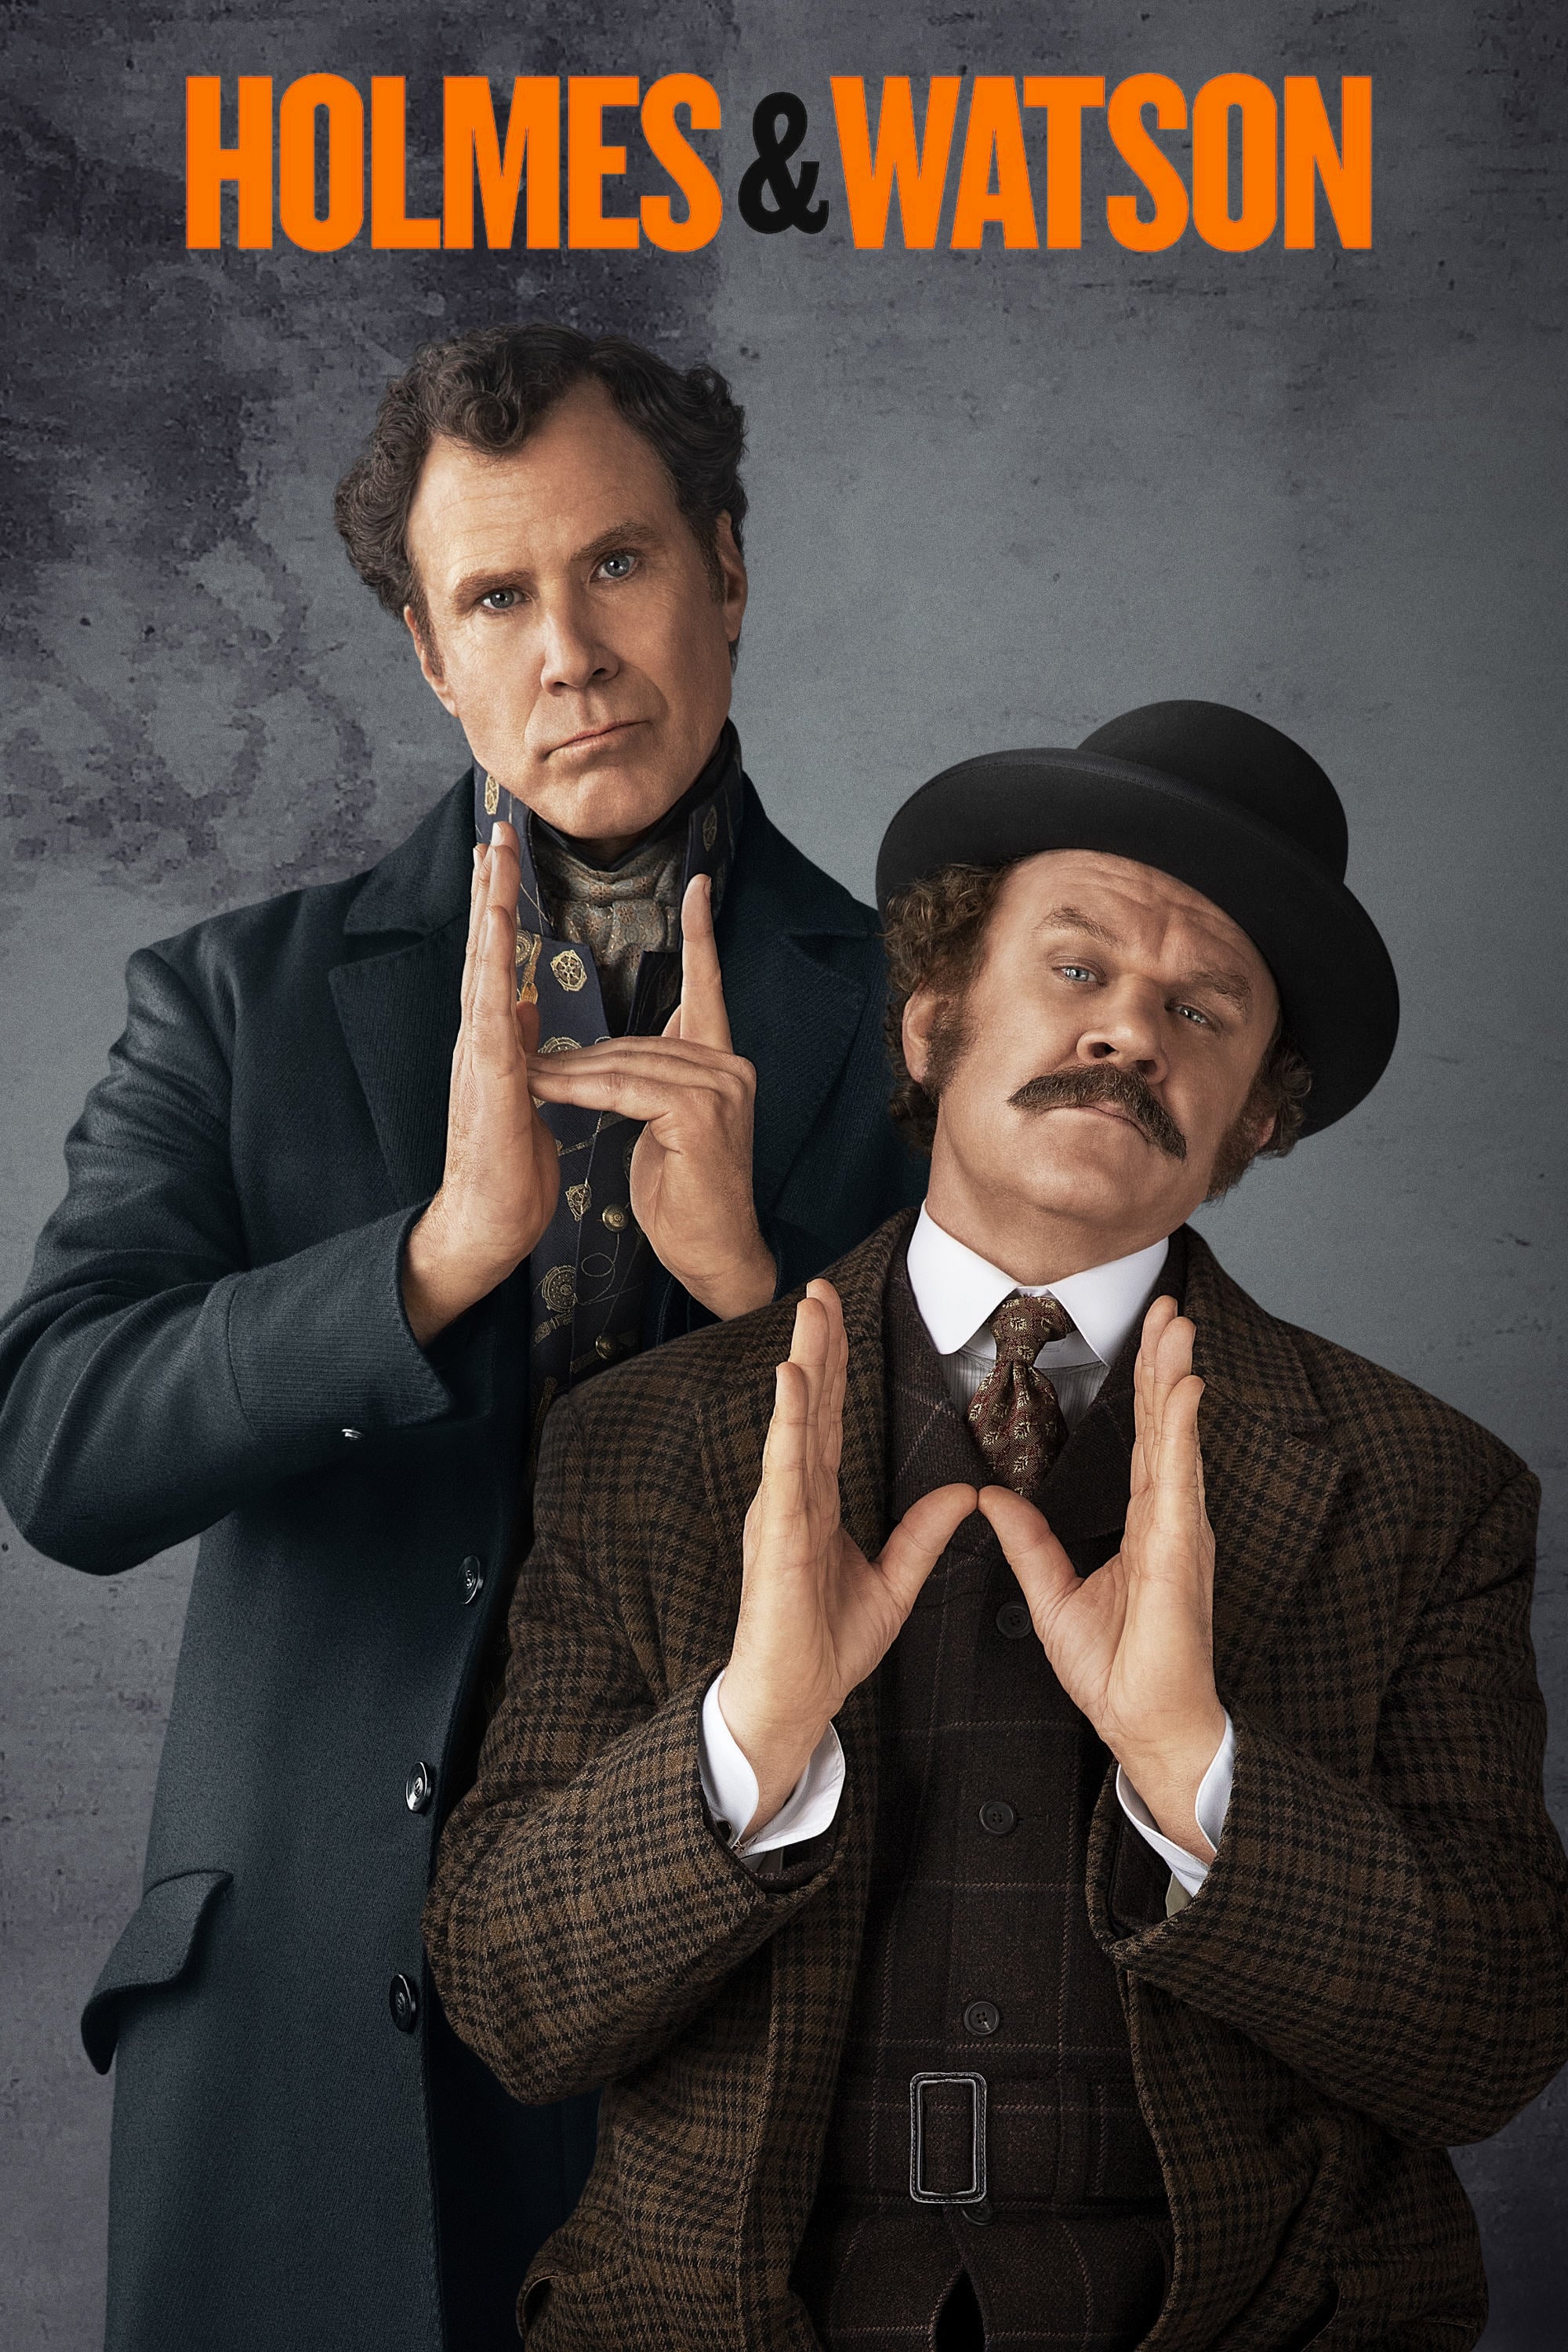 Poster for the movie "Holmes & Watson"